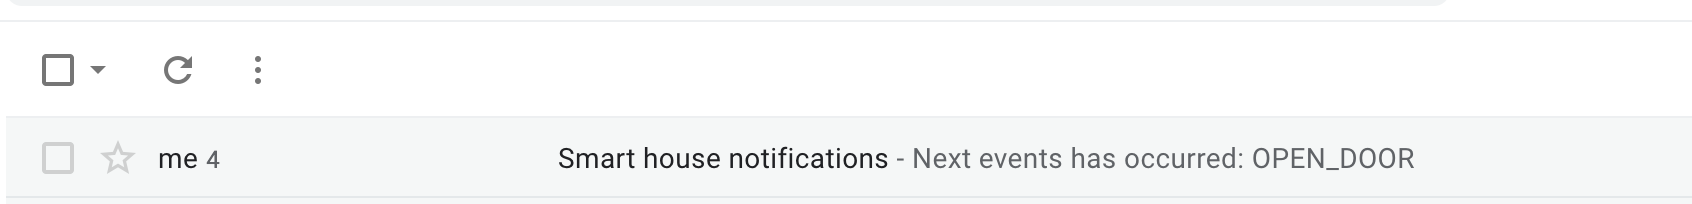 Notification email